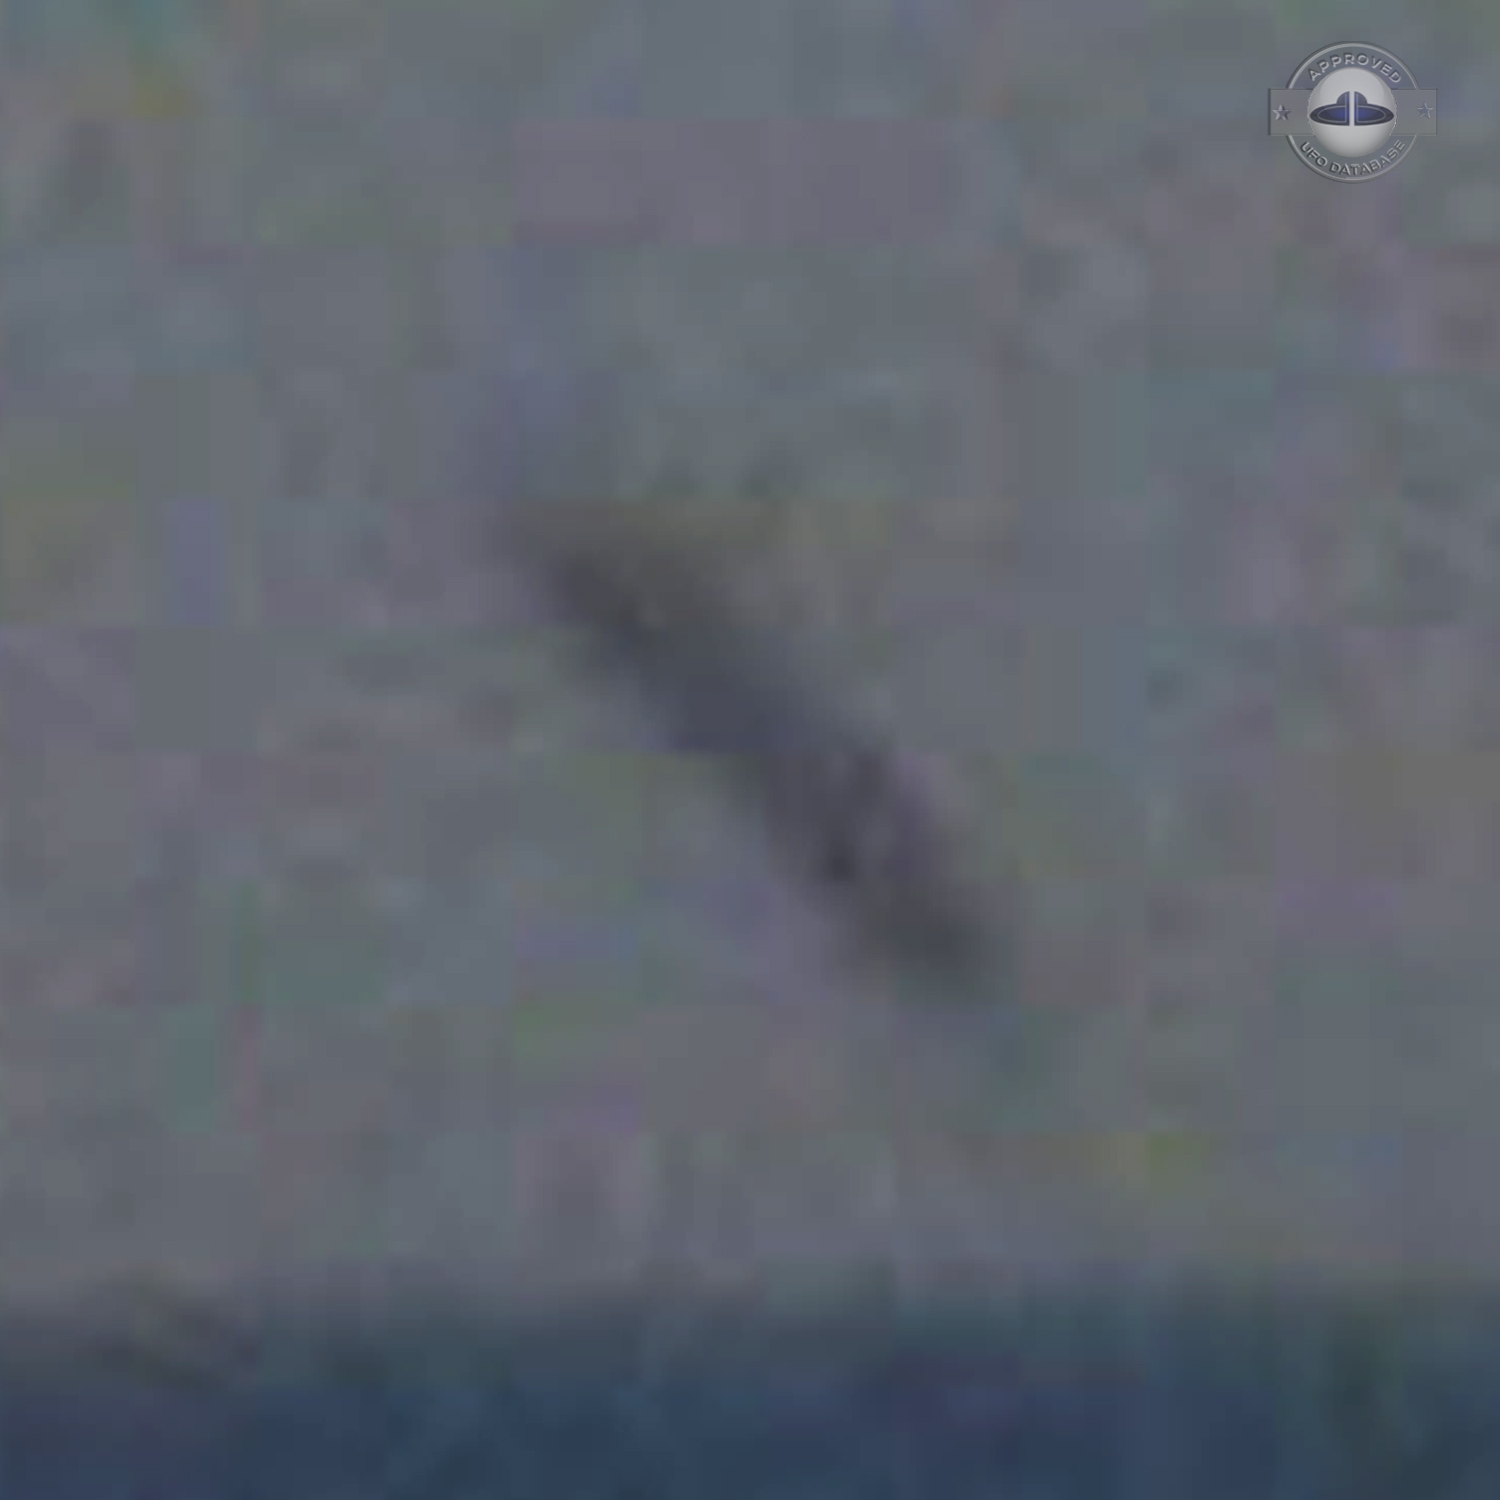 Proof of UFO diving under the Sea Canary island Fuerteventura | 2011 UFO Picture #235-5